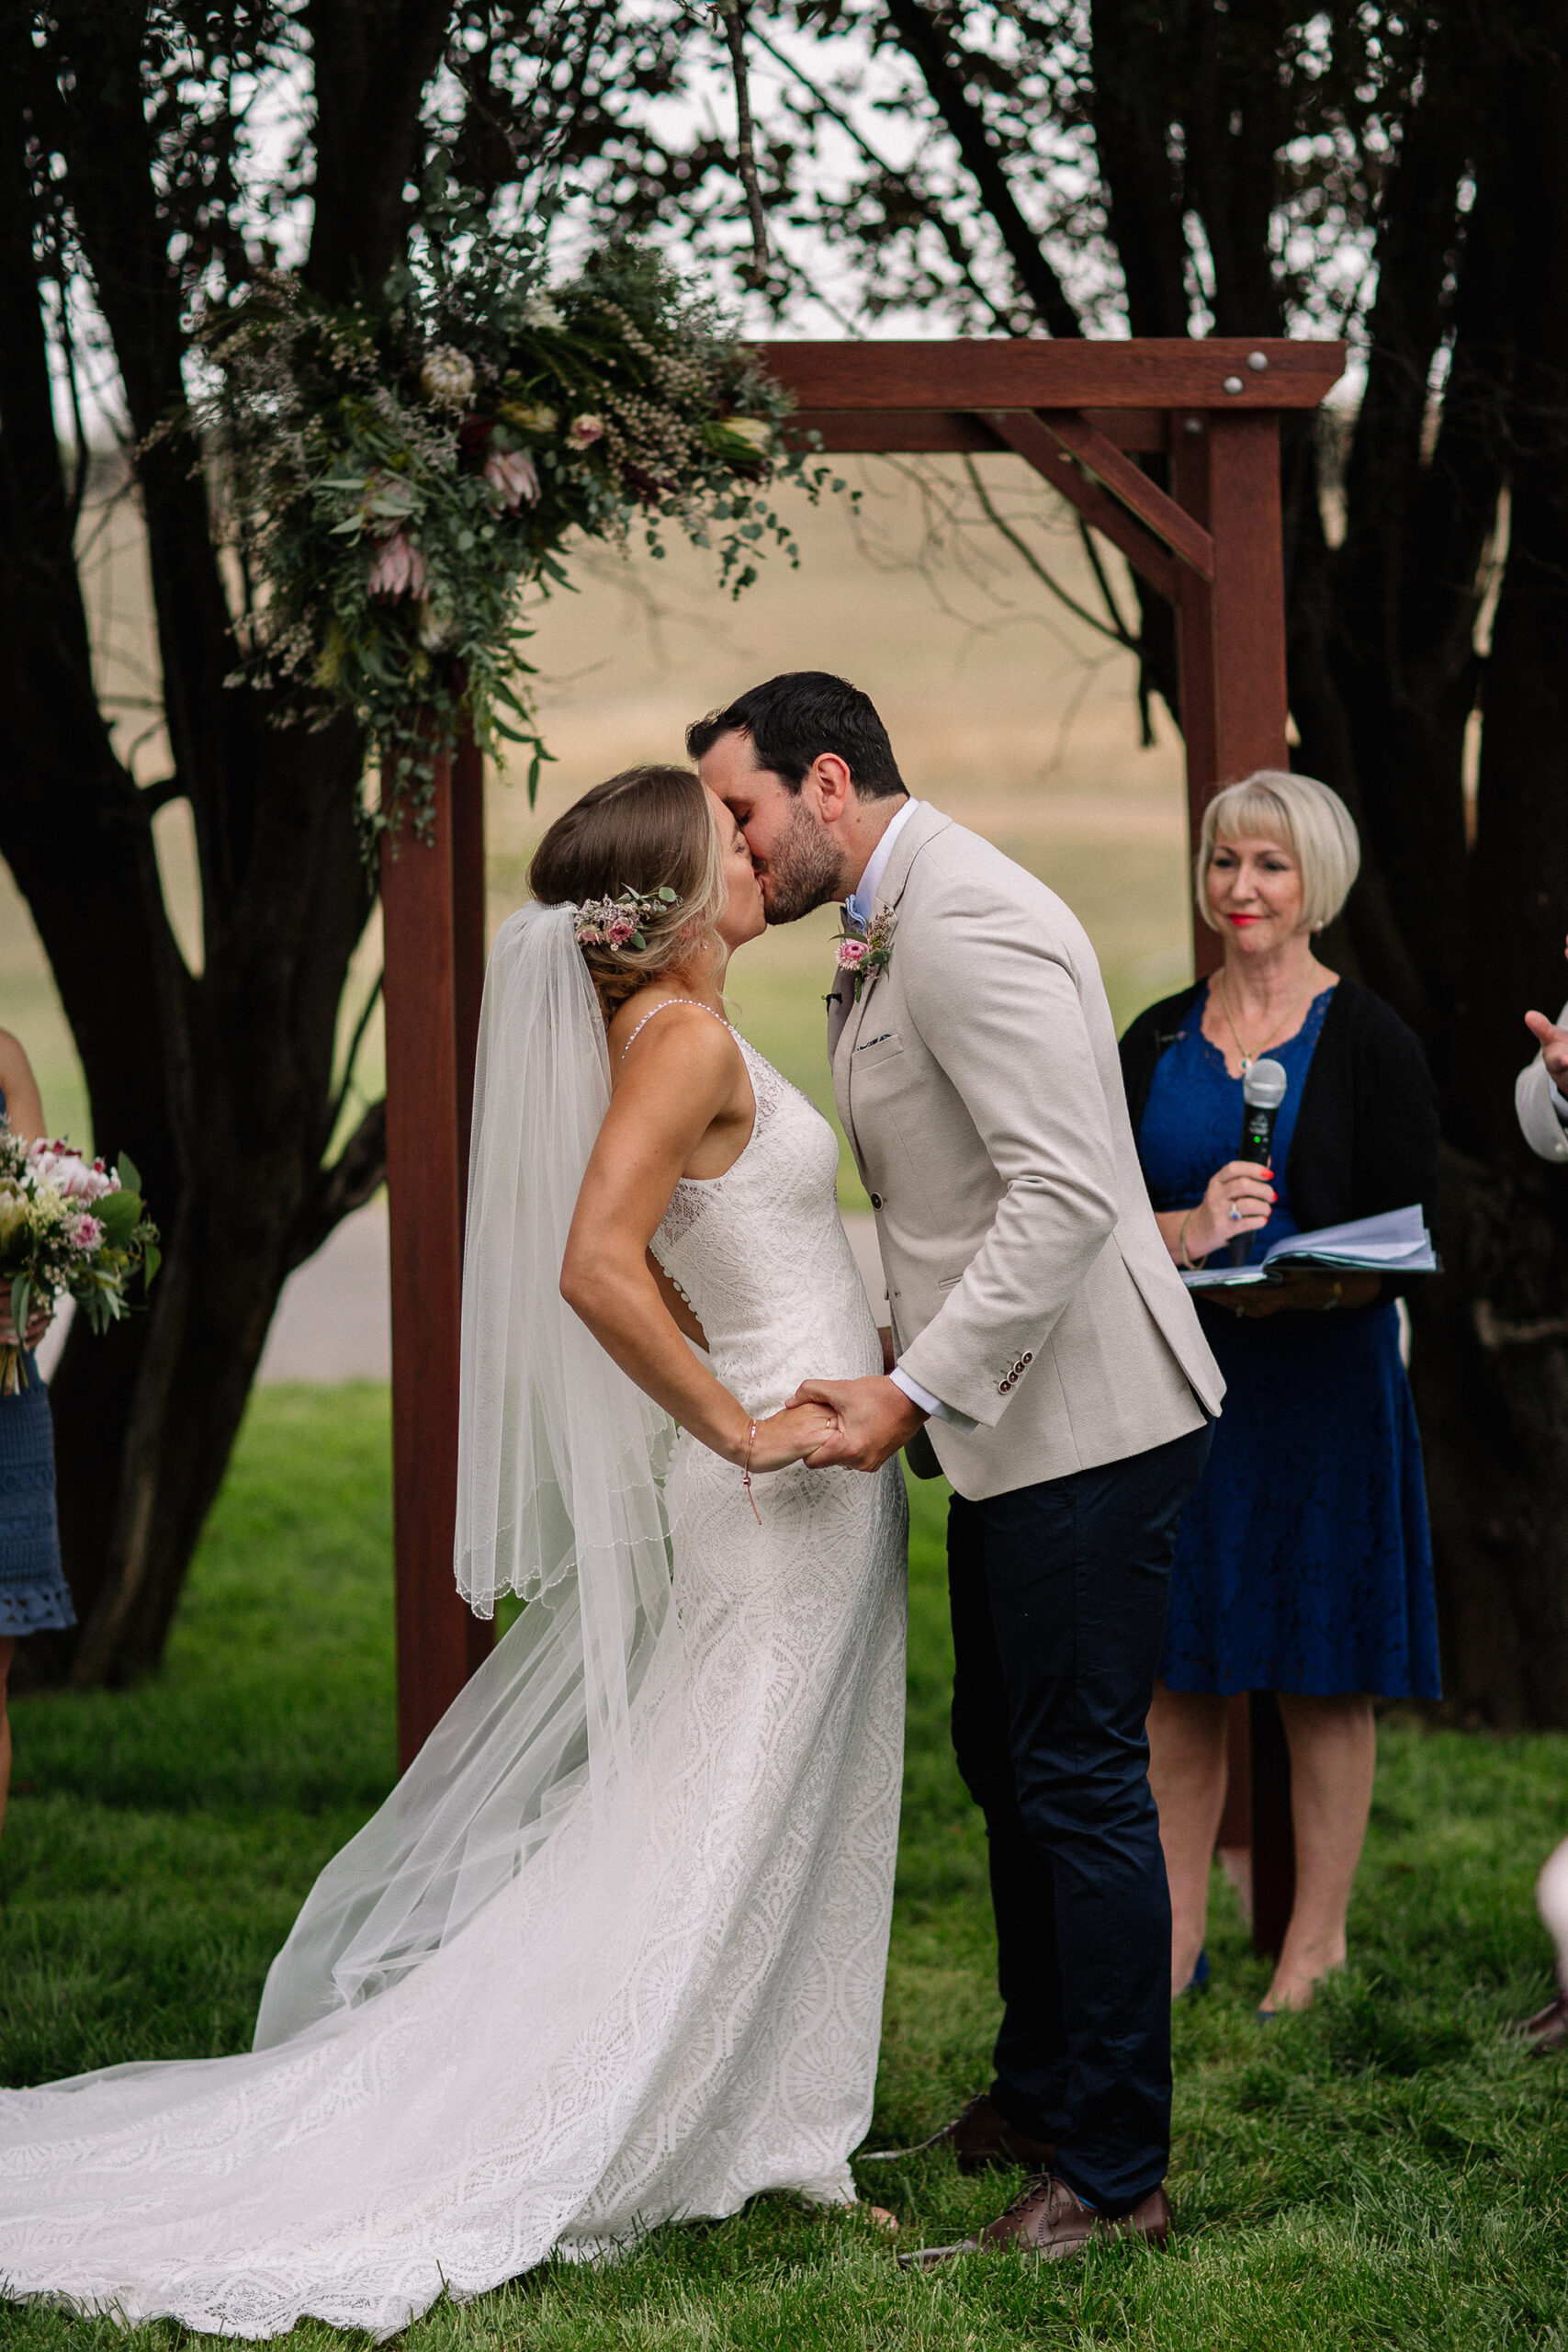 Ellie Shannan Rustic Country Wedding David Campbell Imagery SBS 017 scaled